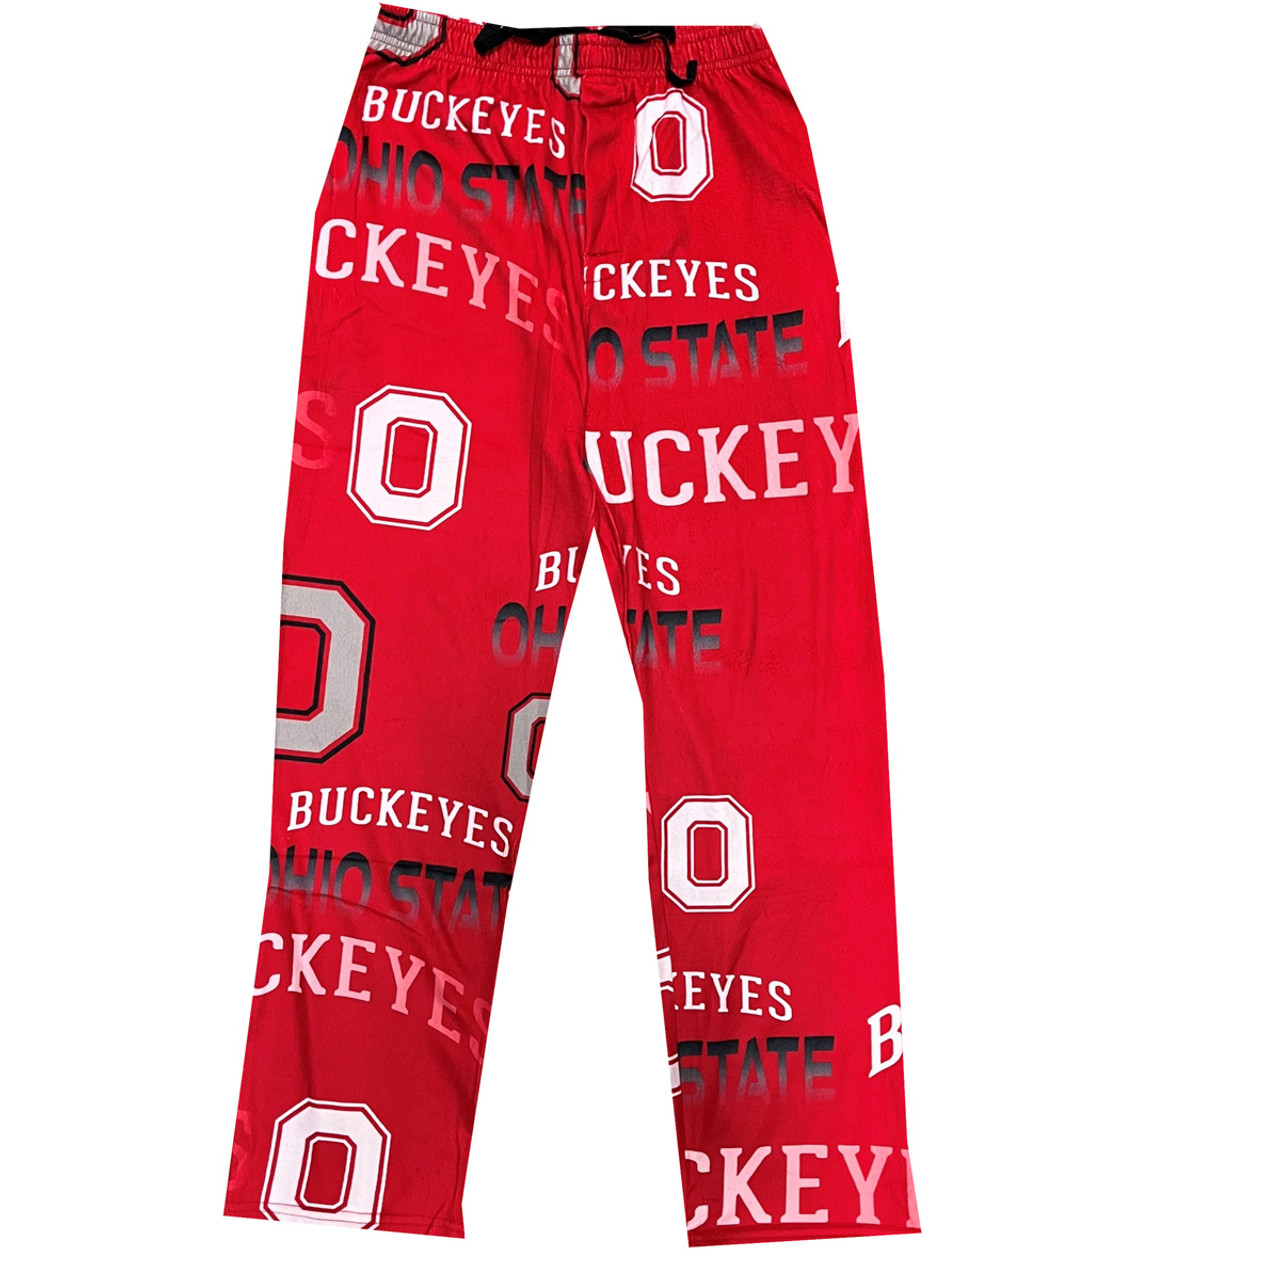 Ohio State Red Super Soft Fleece Pants w/All Over Logos - College